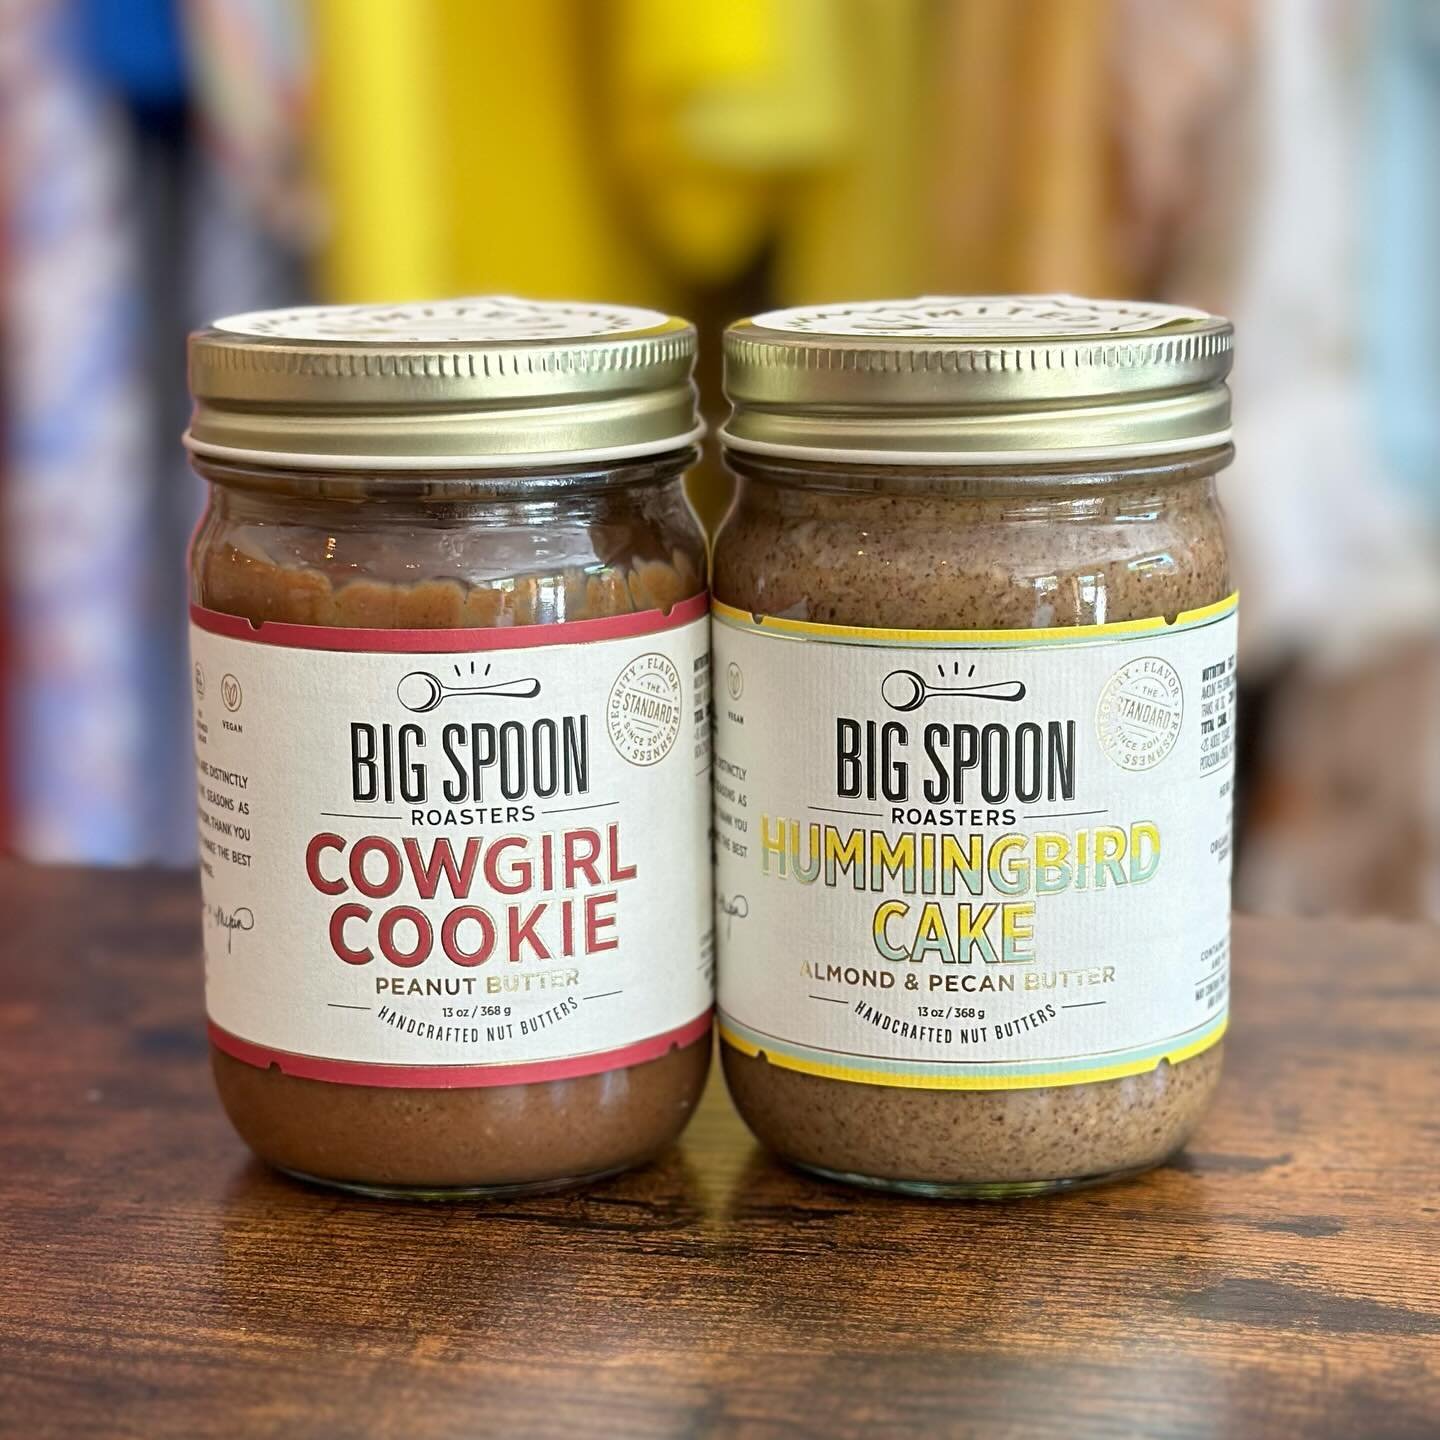 Dani here with a shoutout to 🥜Big Spoon Roasters🥜 small-batch, handcrafted nut butters, specifically my favorite, 🤠Cowgirl Cookie Peanut Butter🤠! These limited-batch nut butters are an absolute treat and so addictive you&rsquo;ll go from putting 